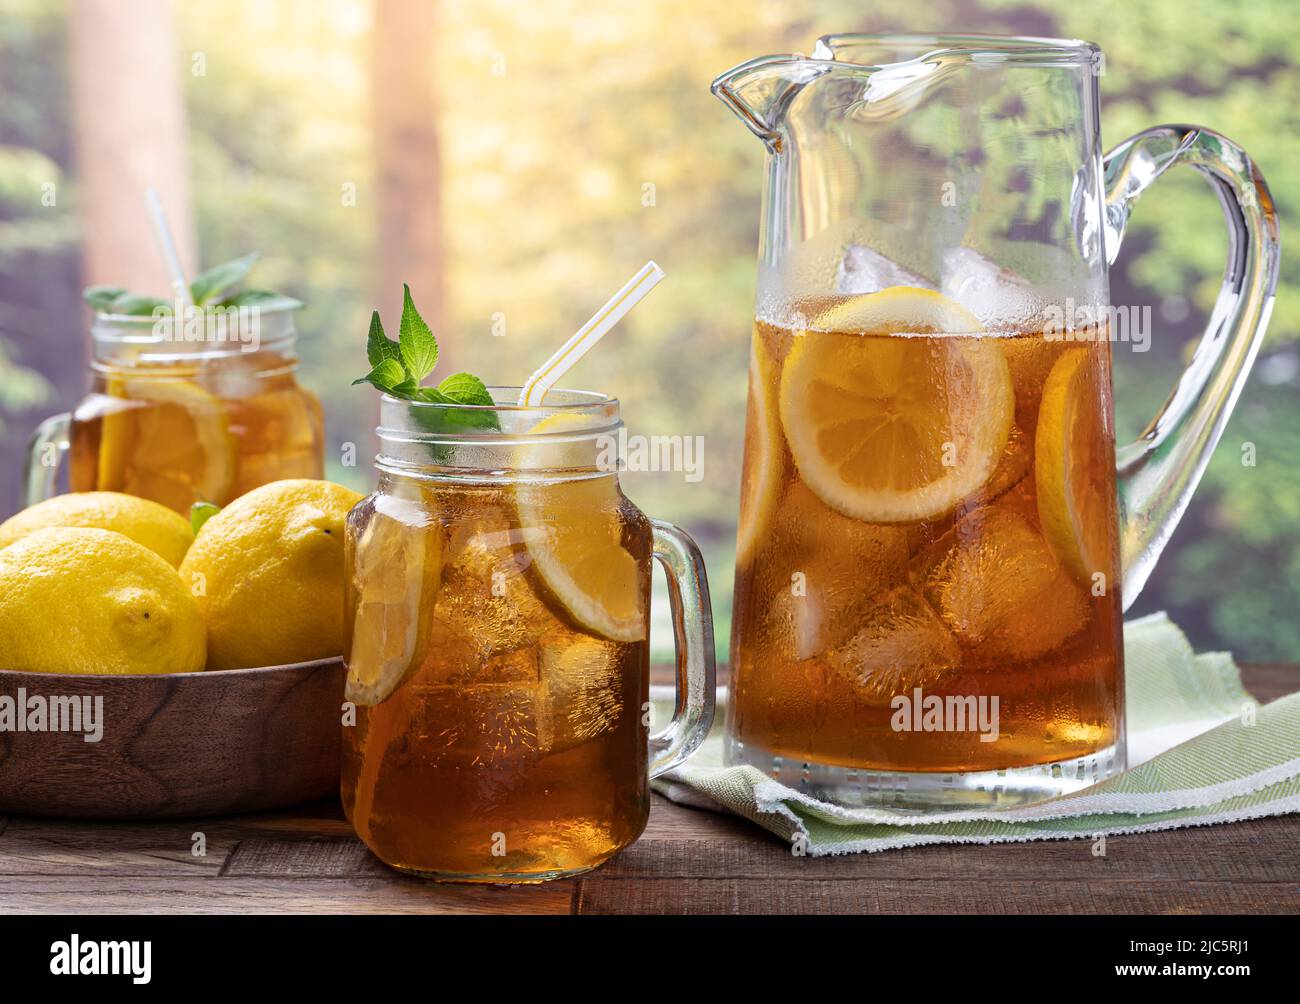 https://c8.alamy.com/comp/2JC5RJ1/glass-and-pitcher-of-iced-tea-with-mint-lemon-slices-and-ice-on-an-outdoor-wooden-table-with-rural-summer-background-2JC5RJ1.jpg